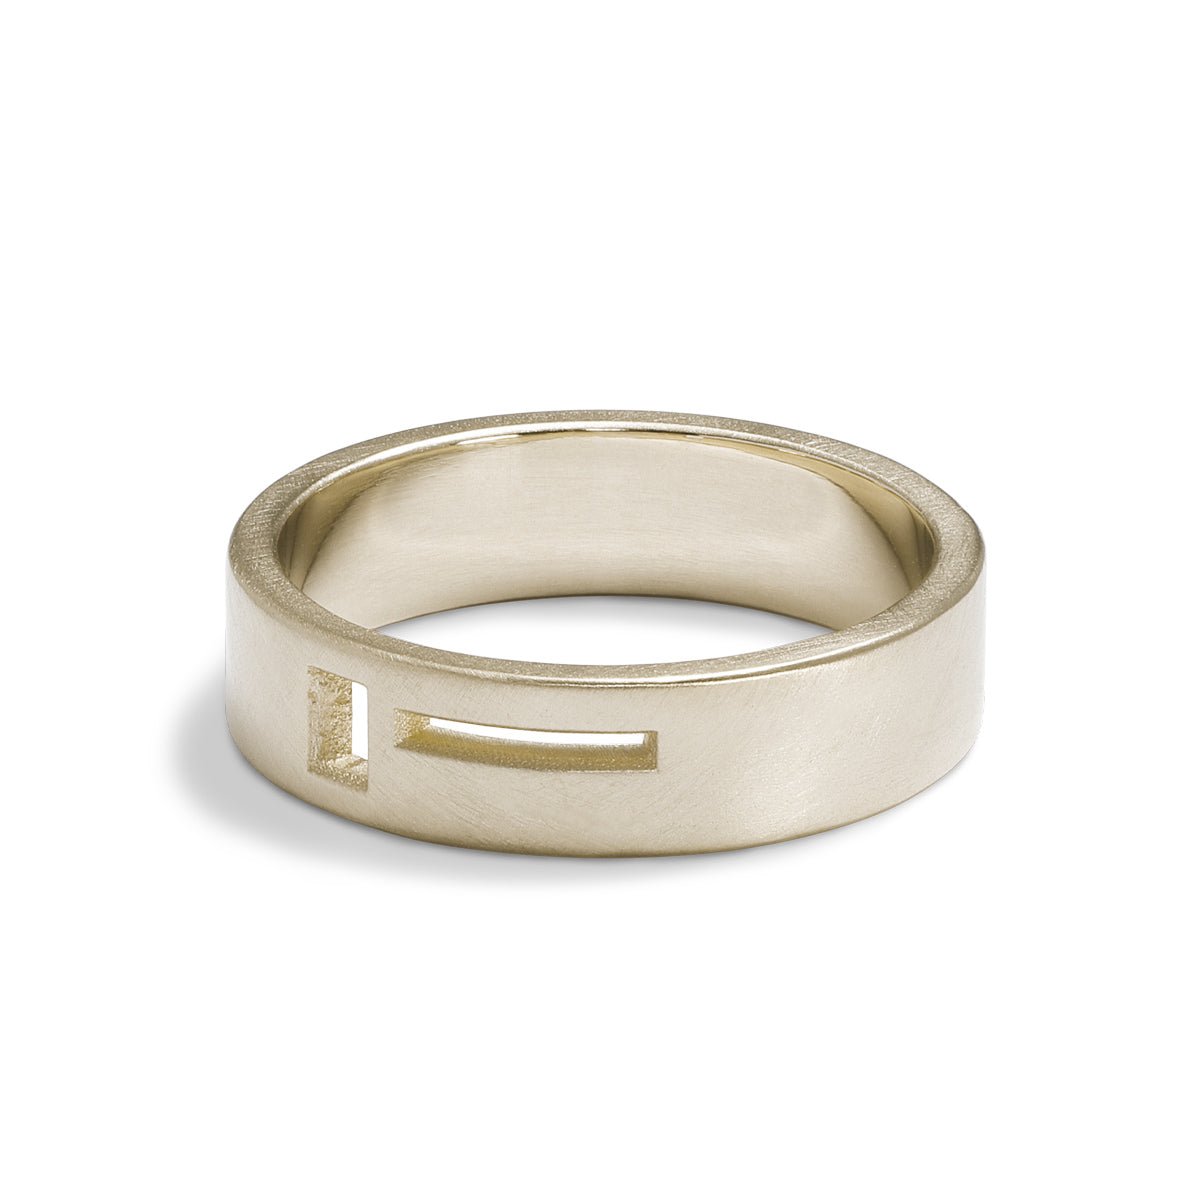 Wide band Sero ring. Features geometric cut-out band in 14K recycled white gold. Designed and crafted in Portland, Oregon.